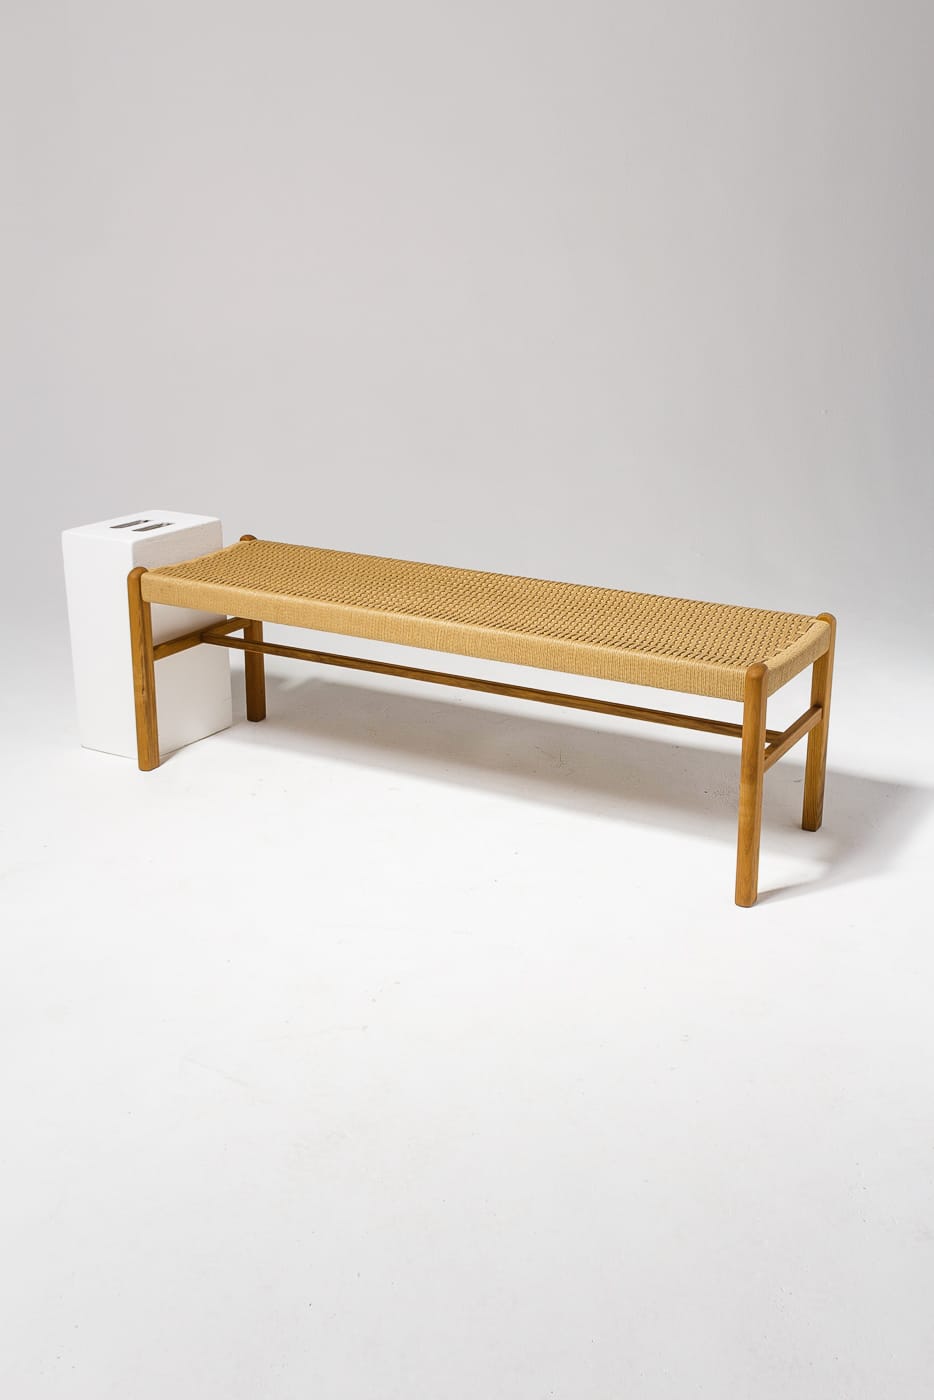 AB057 Chester Woven Rattan Bench Prop Rental | ACME Brooklyn